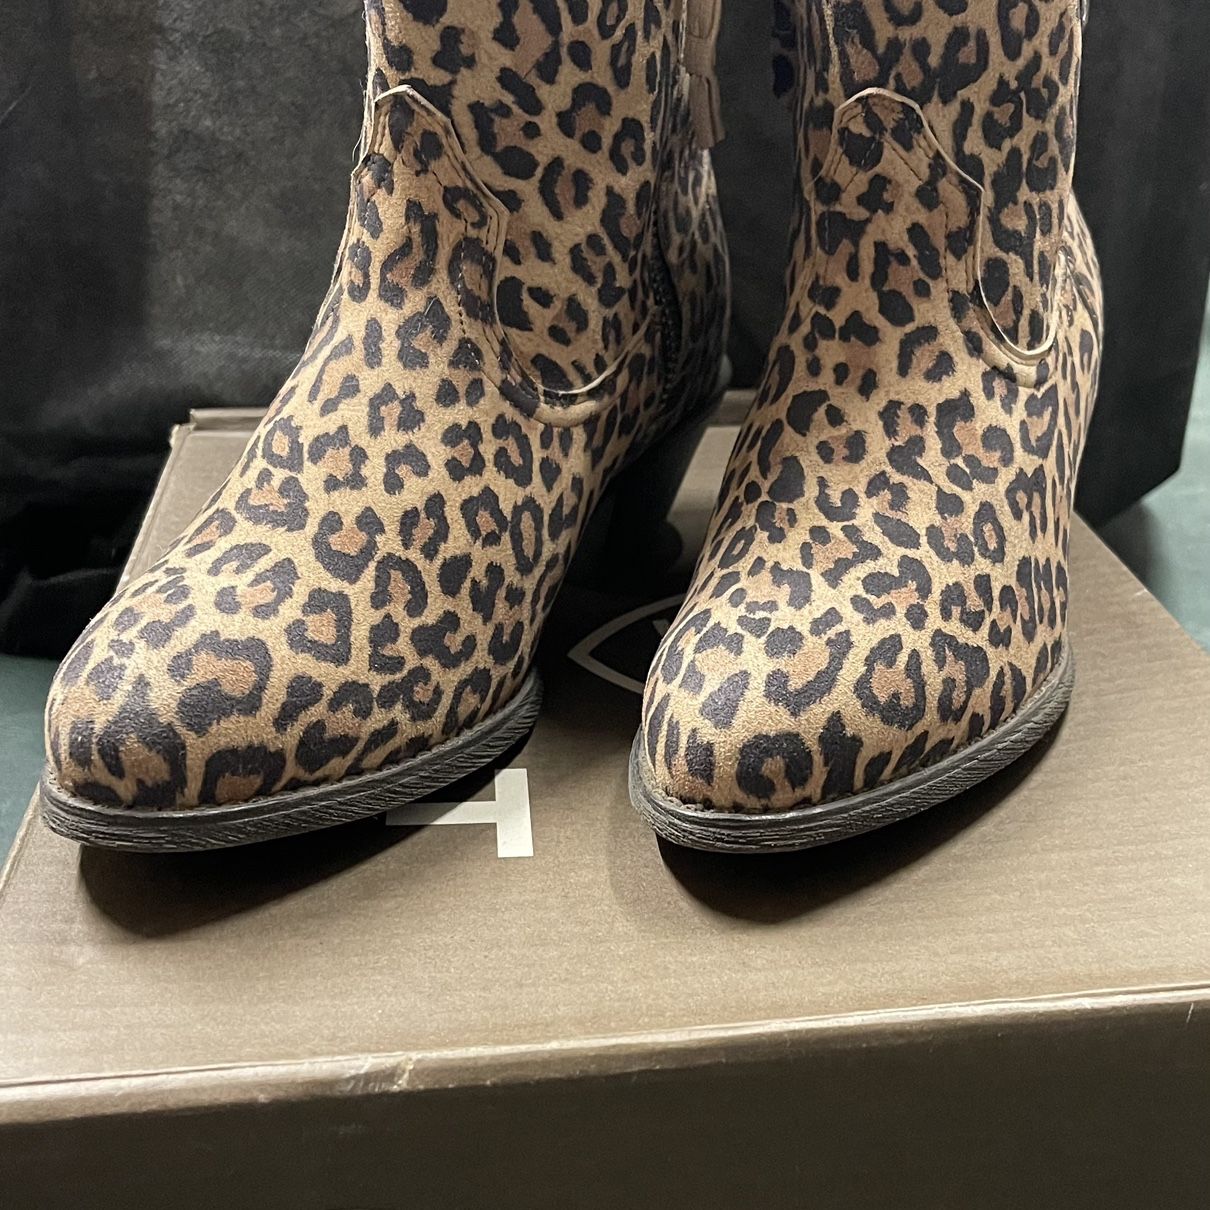 ARIAT DARLIN SHORT WESTERN BOOT IN LEOPARD PRINT LEATHER 